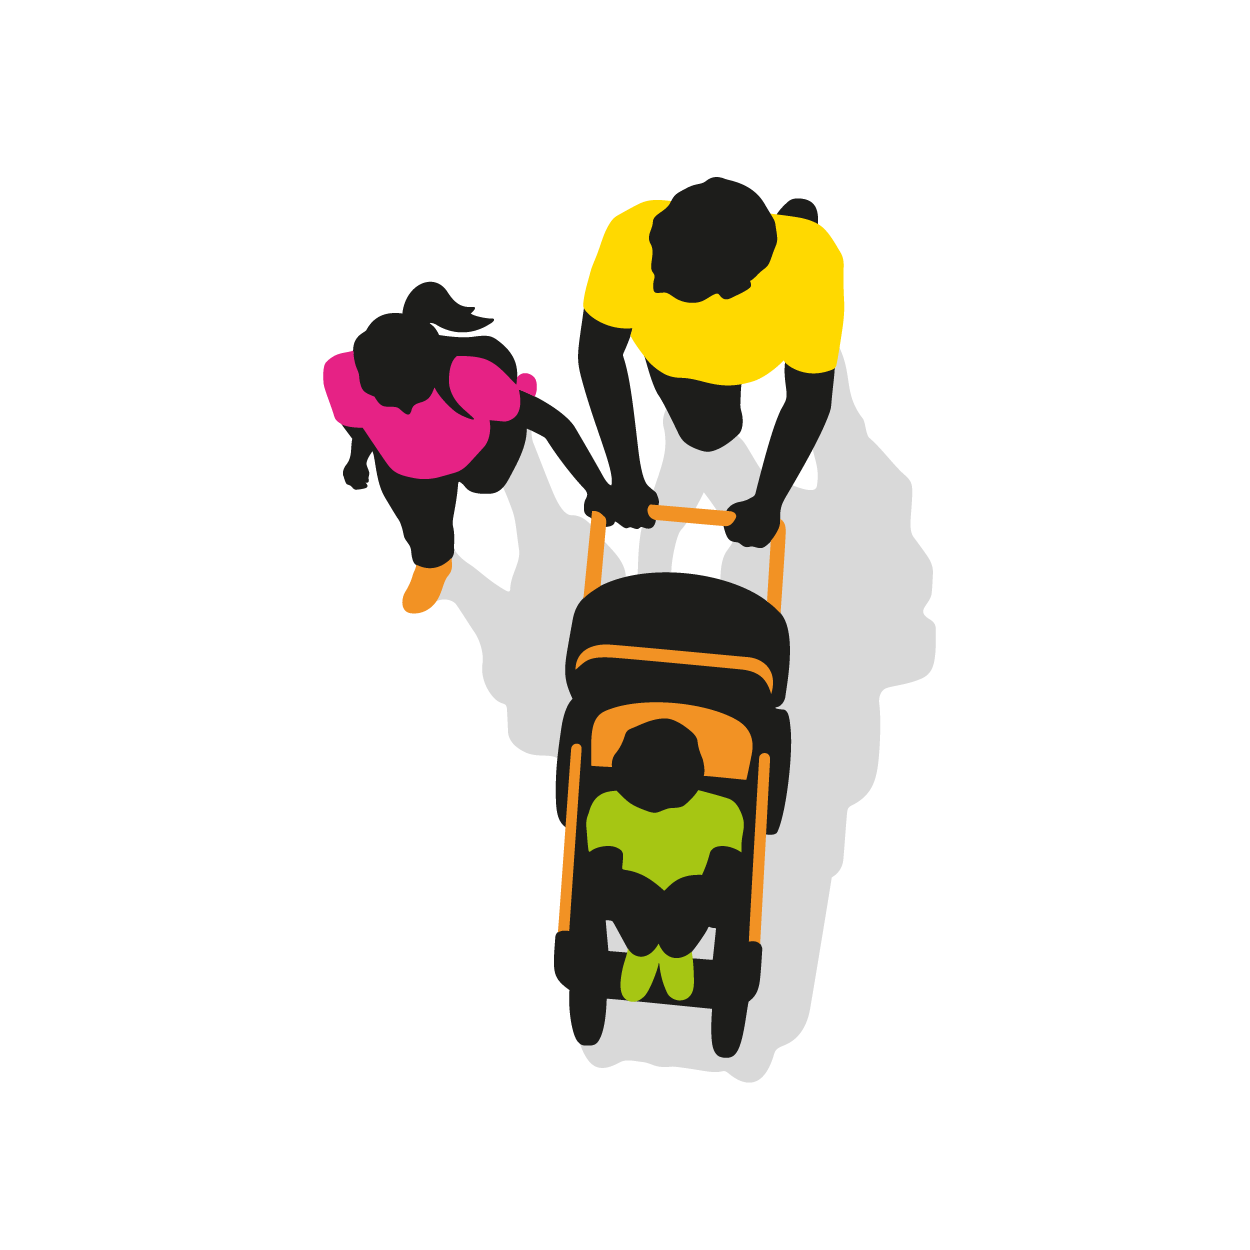 Graphic of a person pushing a buggy with a small child inside and a little girl walking along the side